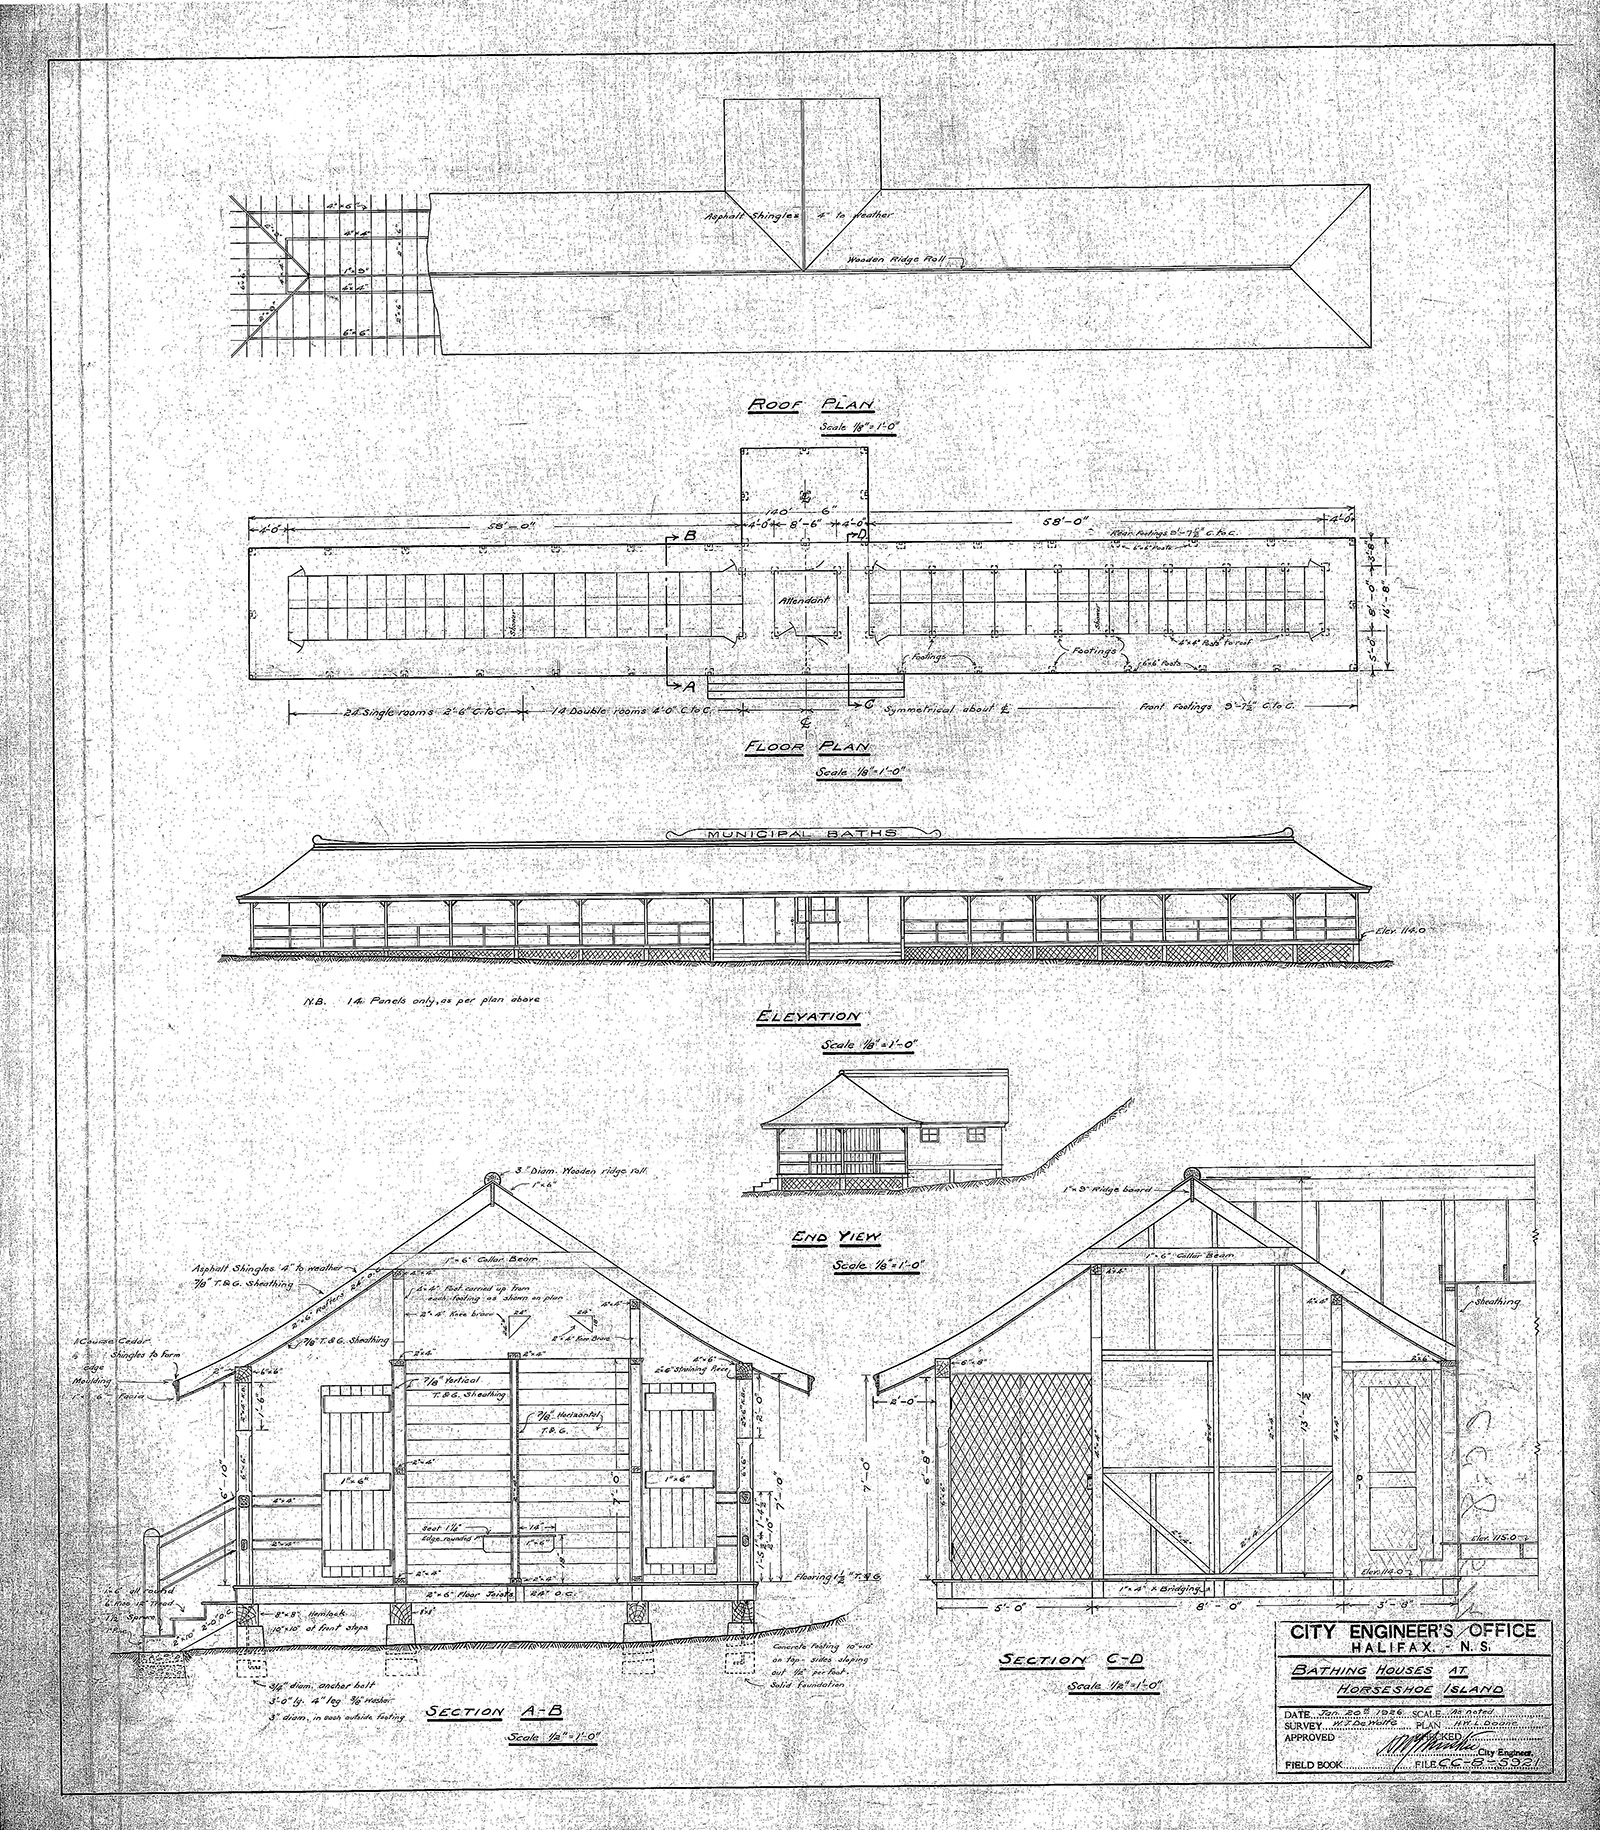 Black and white architectural plans for bathing house at Horseshoe Island, 1926.